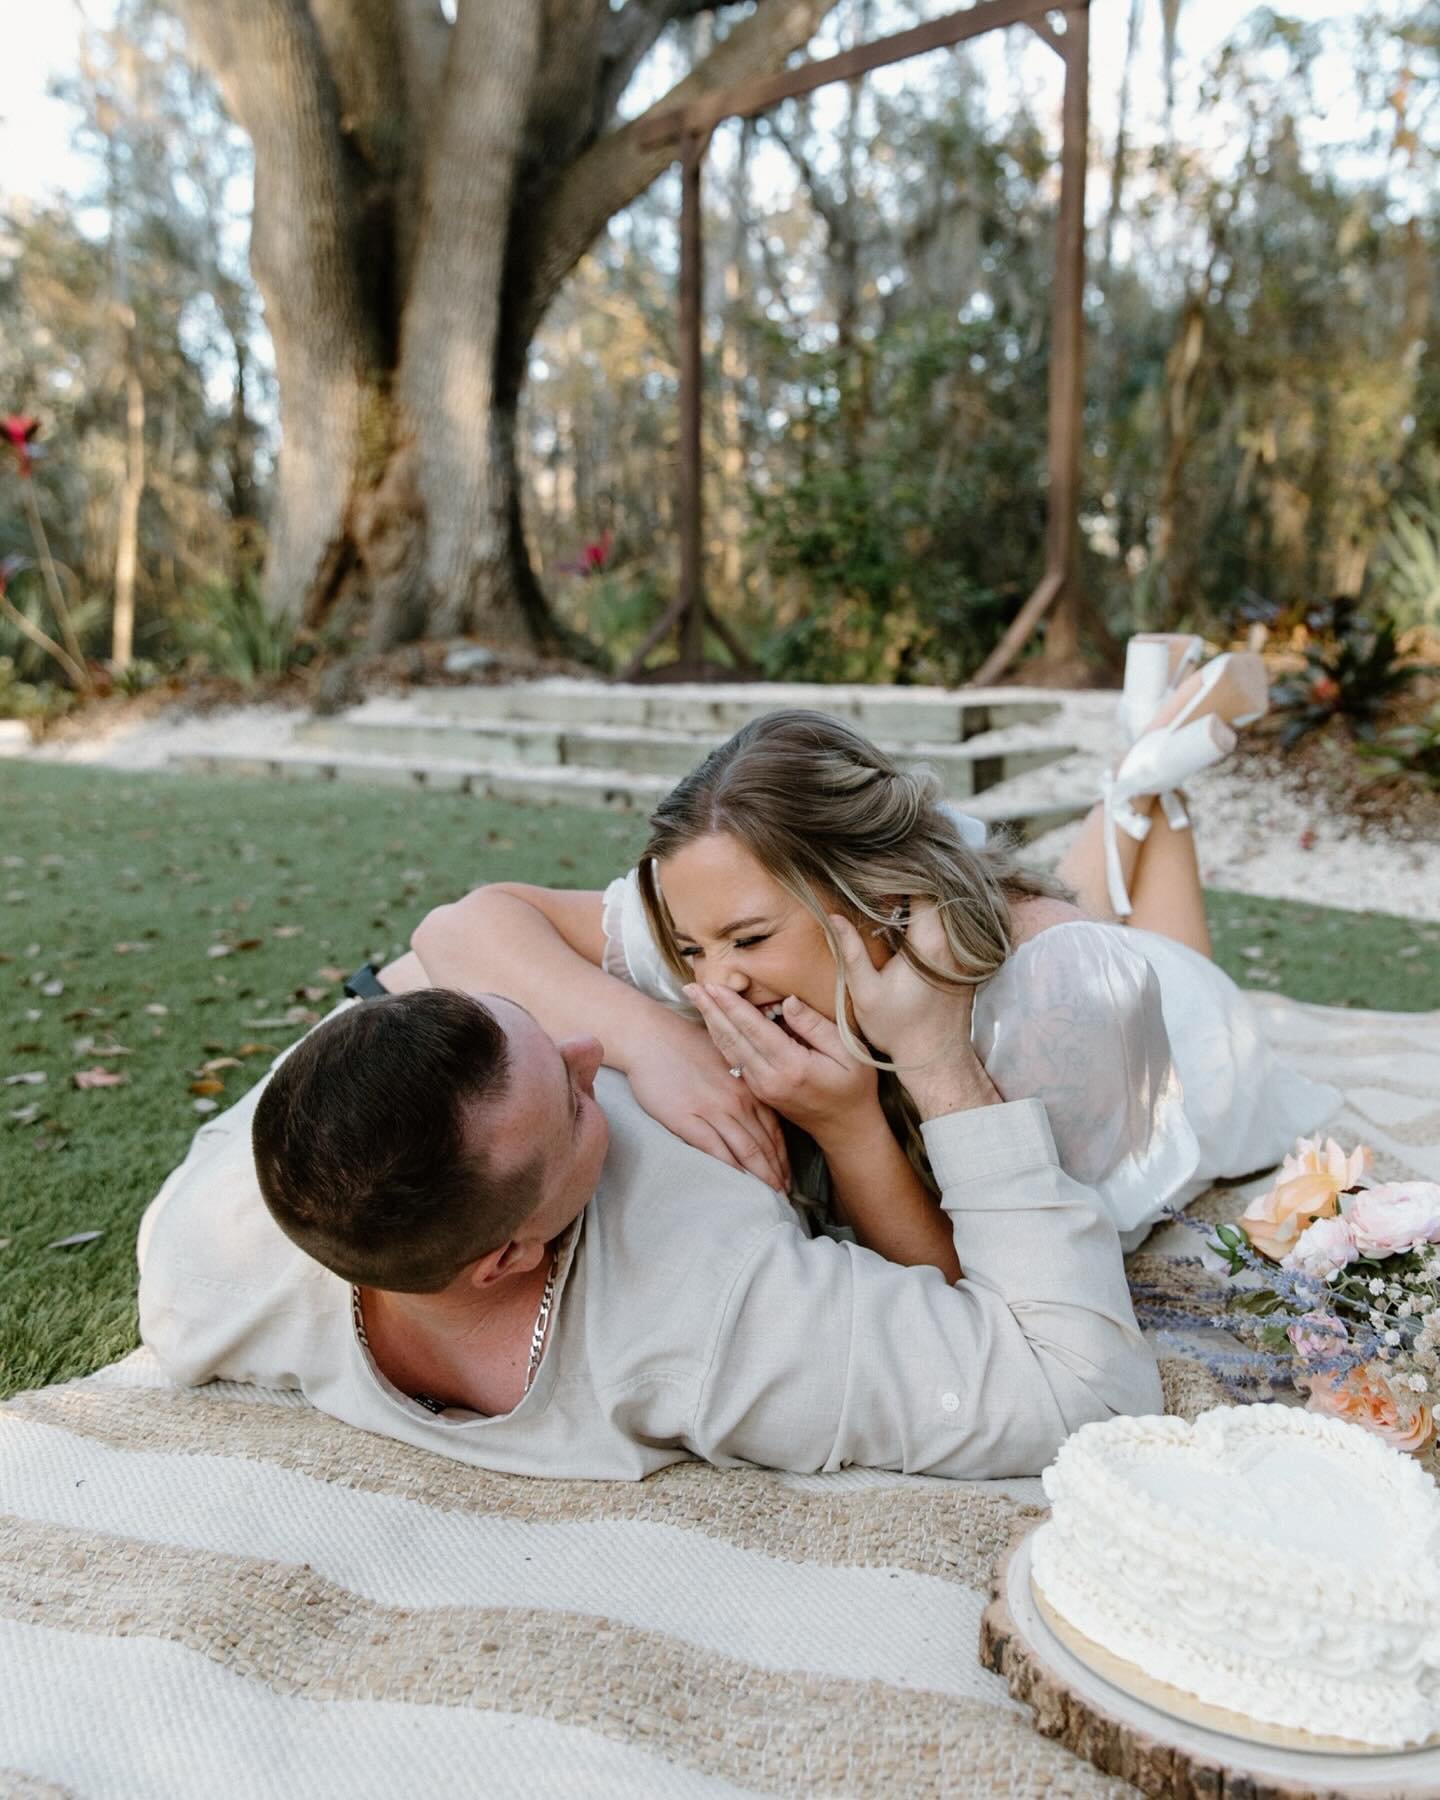 The cutest picnic for Kierstin &amp; Zach&rsquo;s engagements. 

Fun Fact: Zach is a childhood friend of mine &amp; we grew up racing dirtbikes together! 

#weddingphotographer #engagementphotographer #couplesphotographer #floridaweddingphotographer 